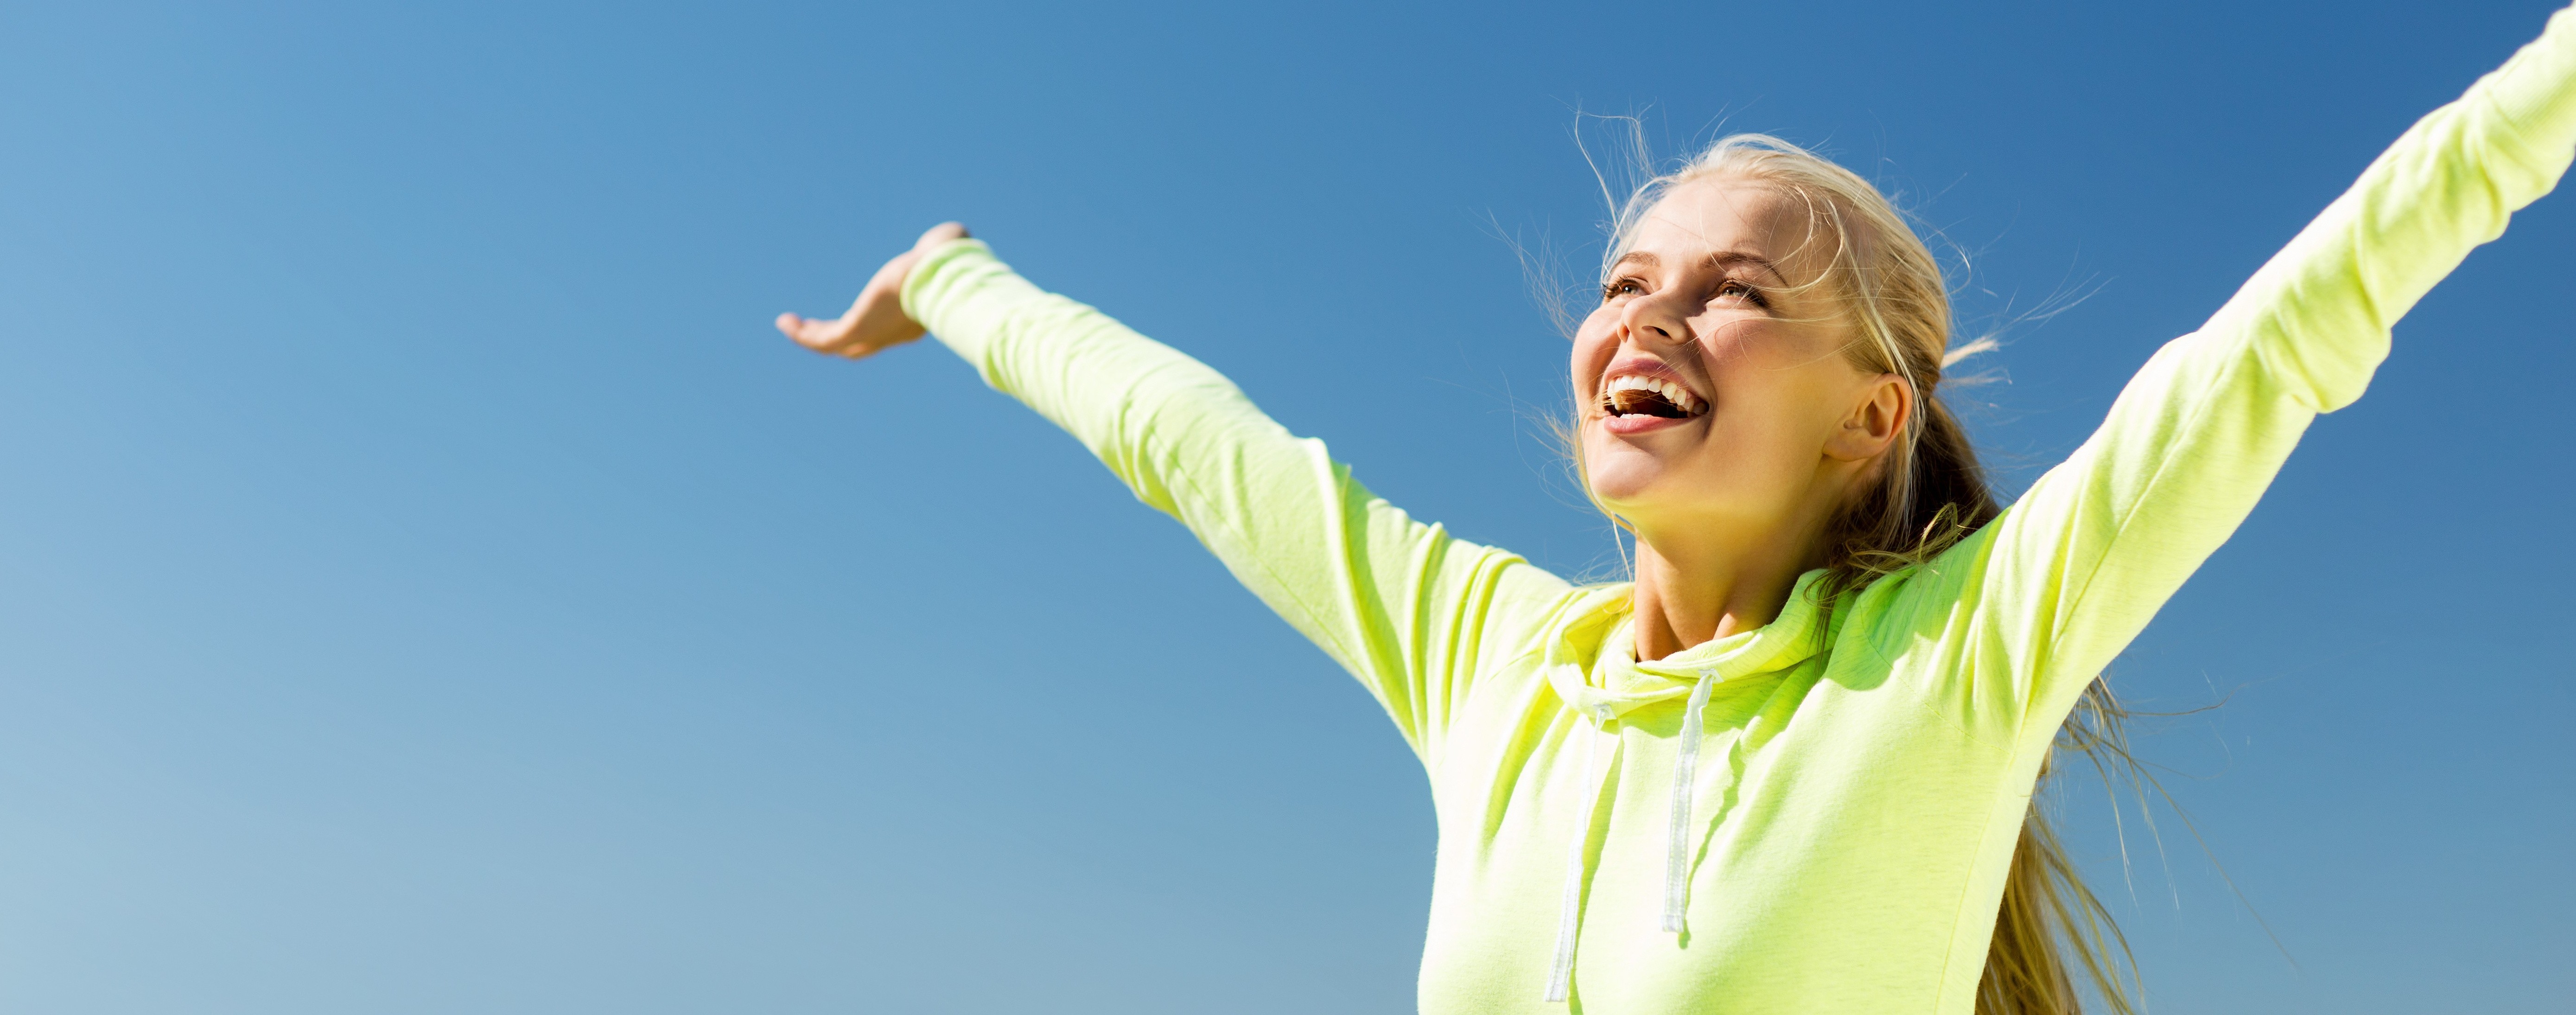 Sun is good for your health, sport and lifestyle concept - woman doing sports outdoors